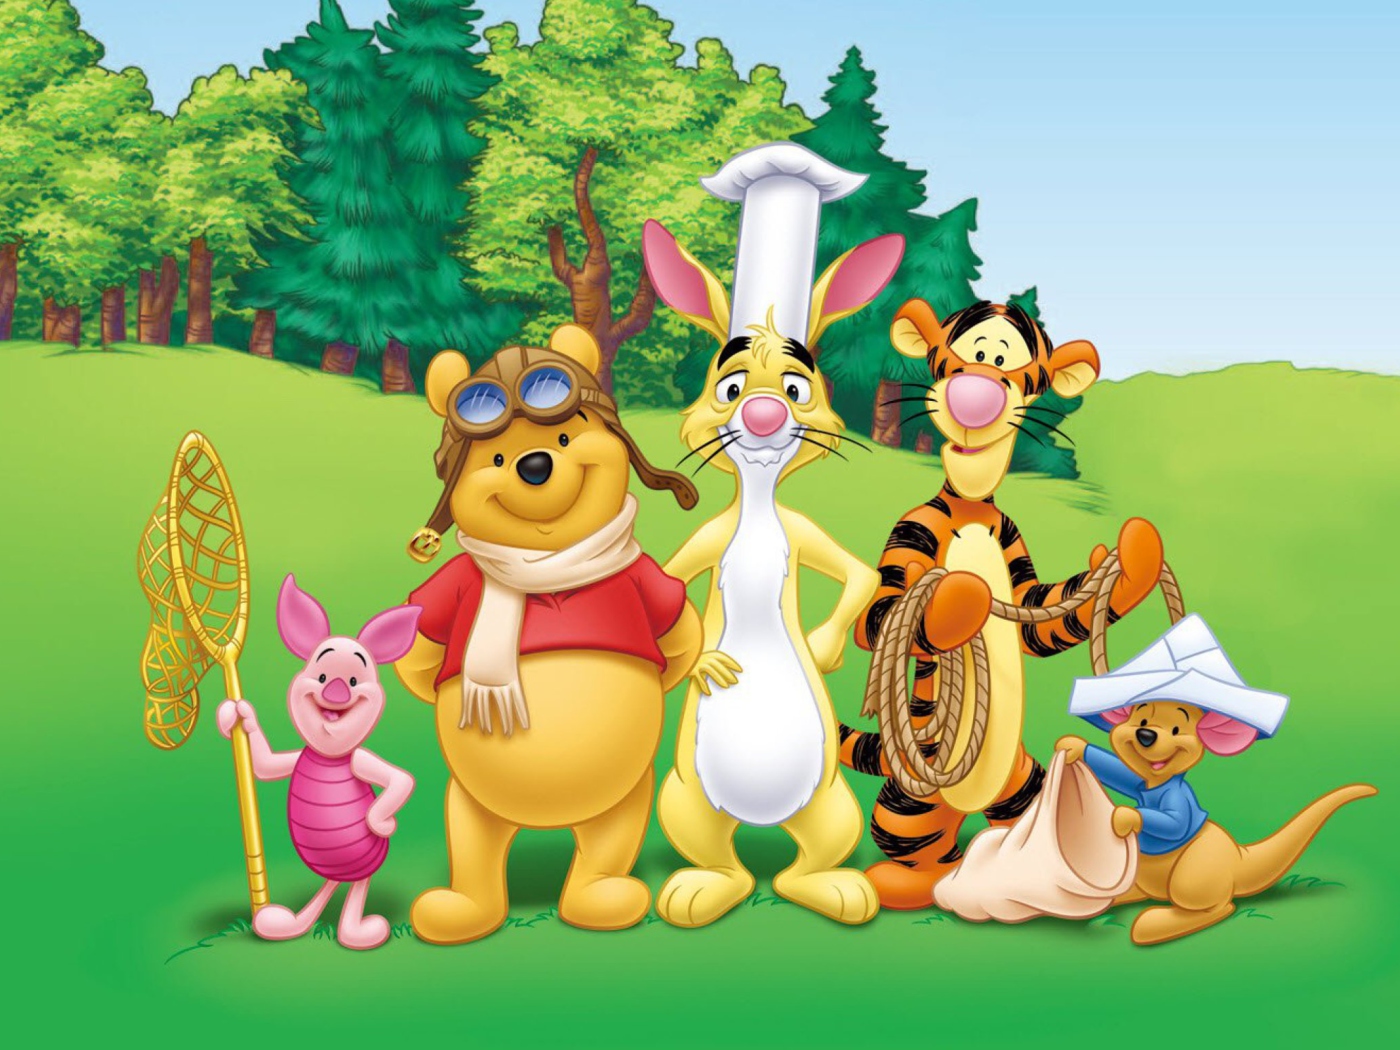 Pooh and Friends wallpaper 1400x1050